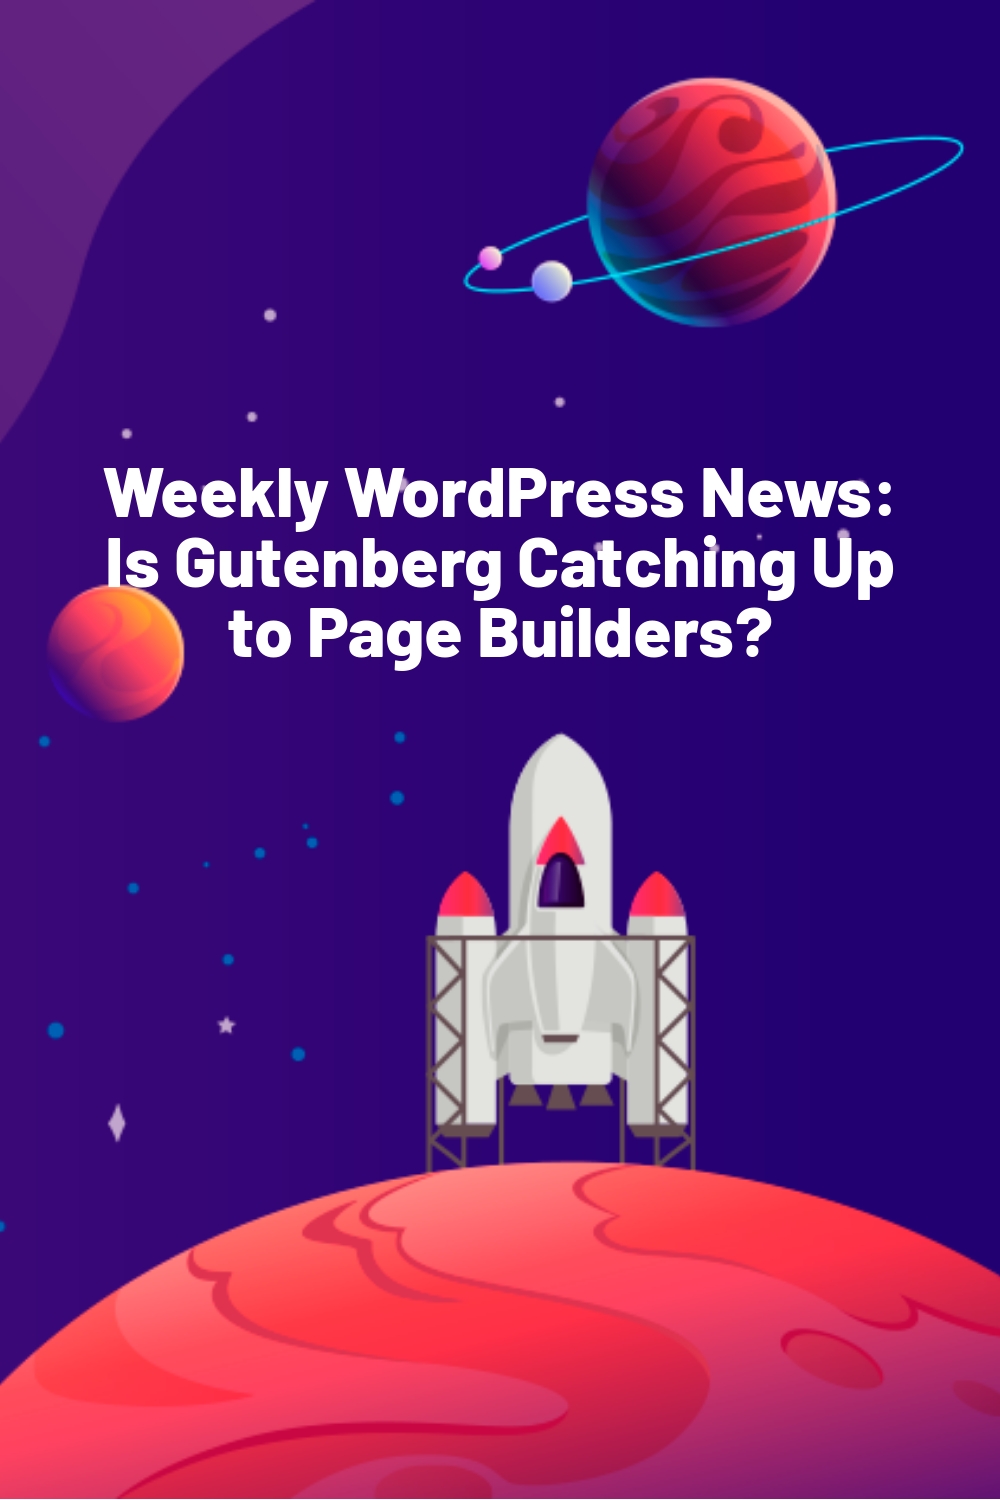 Weekly WordPress News: Is Gutenberg Catching Up to Page Builders?